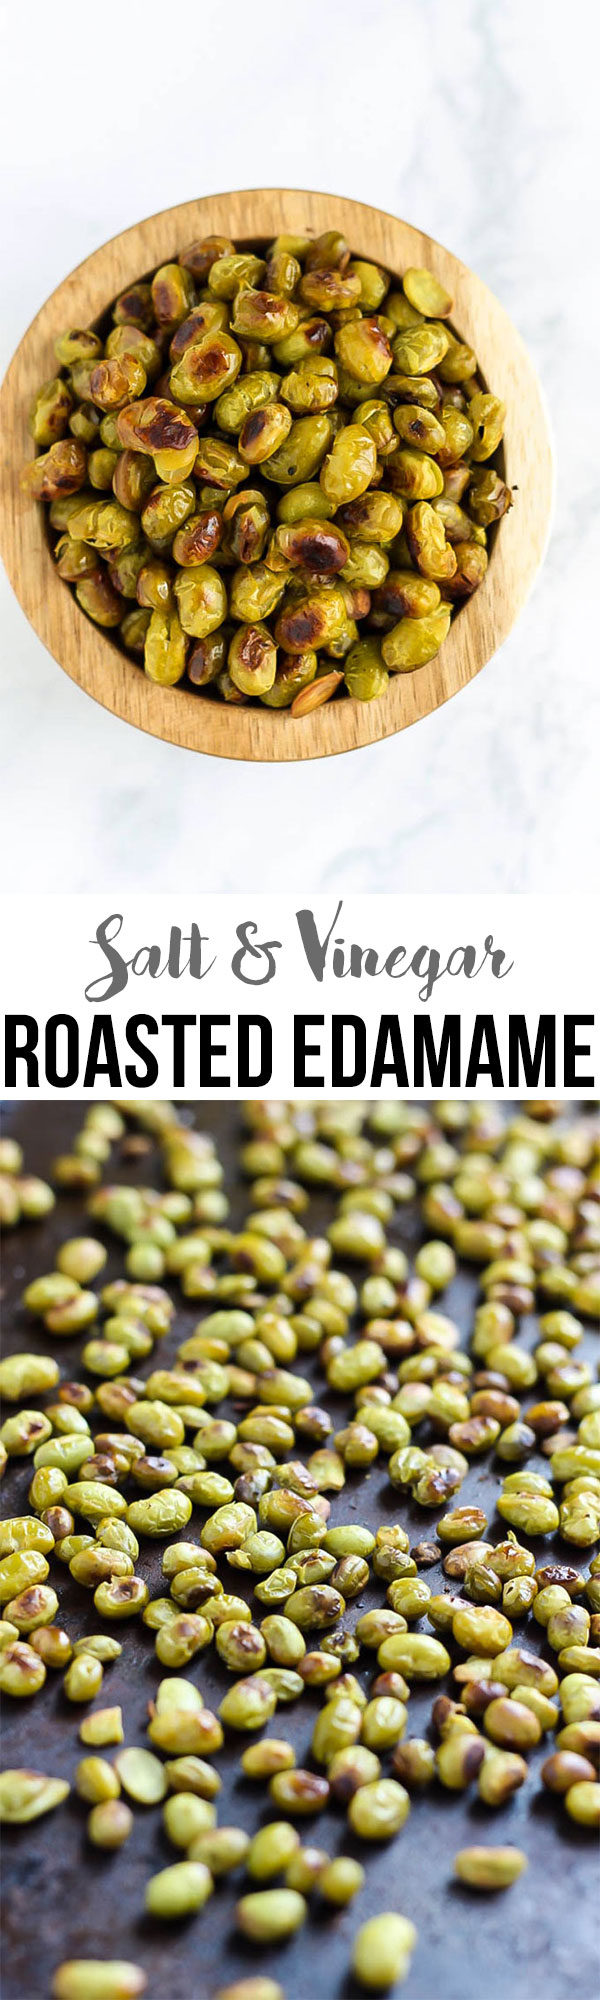 Ditch the chips and reach for a handful of these Salt and Vinegar Roasted Edamame! They're crispy, flavorful, and make a great vegan protein-packed snack.